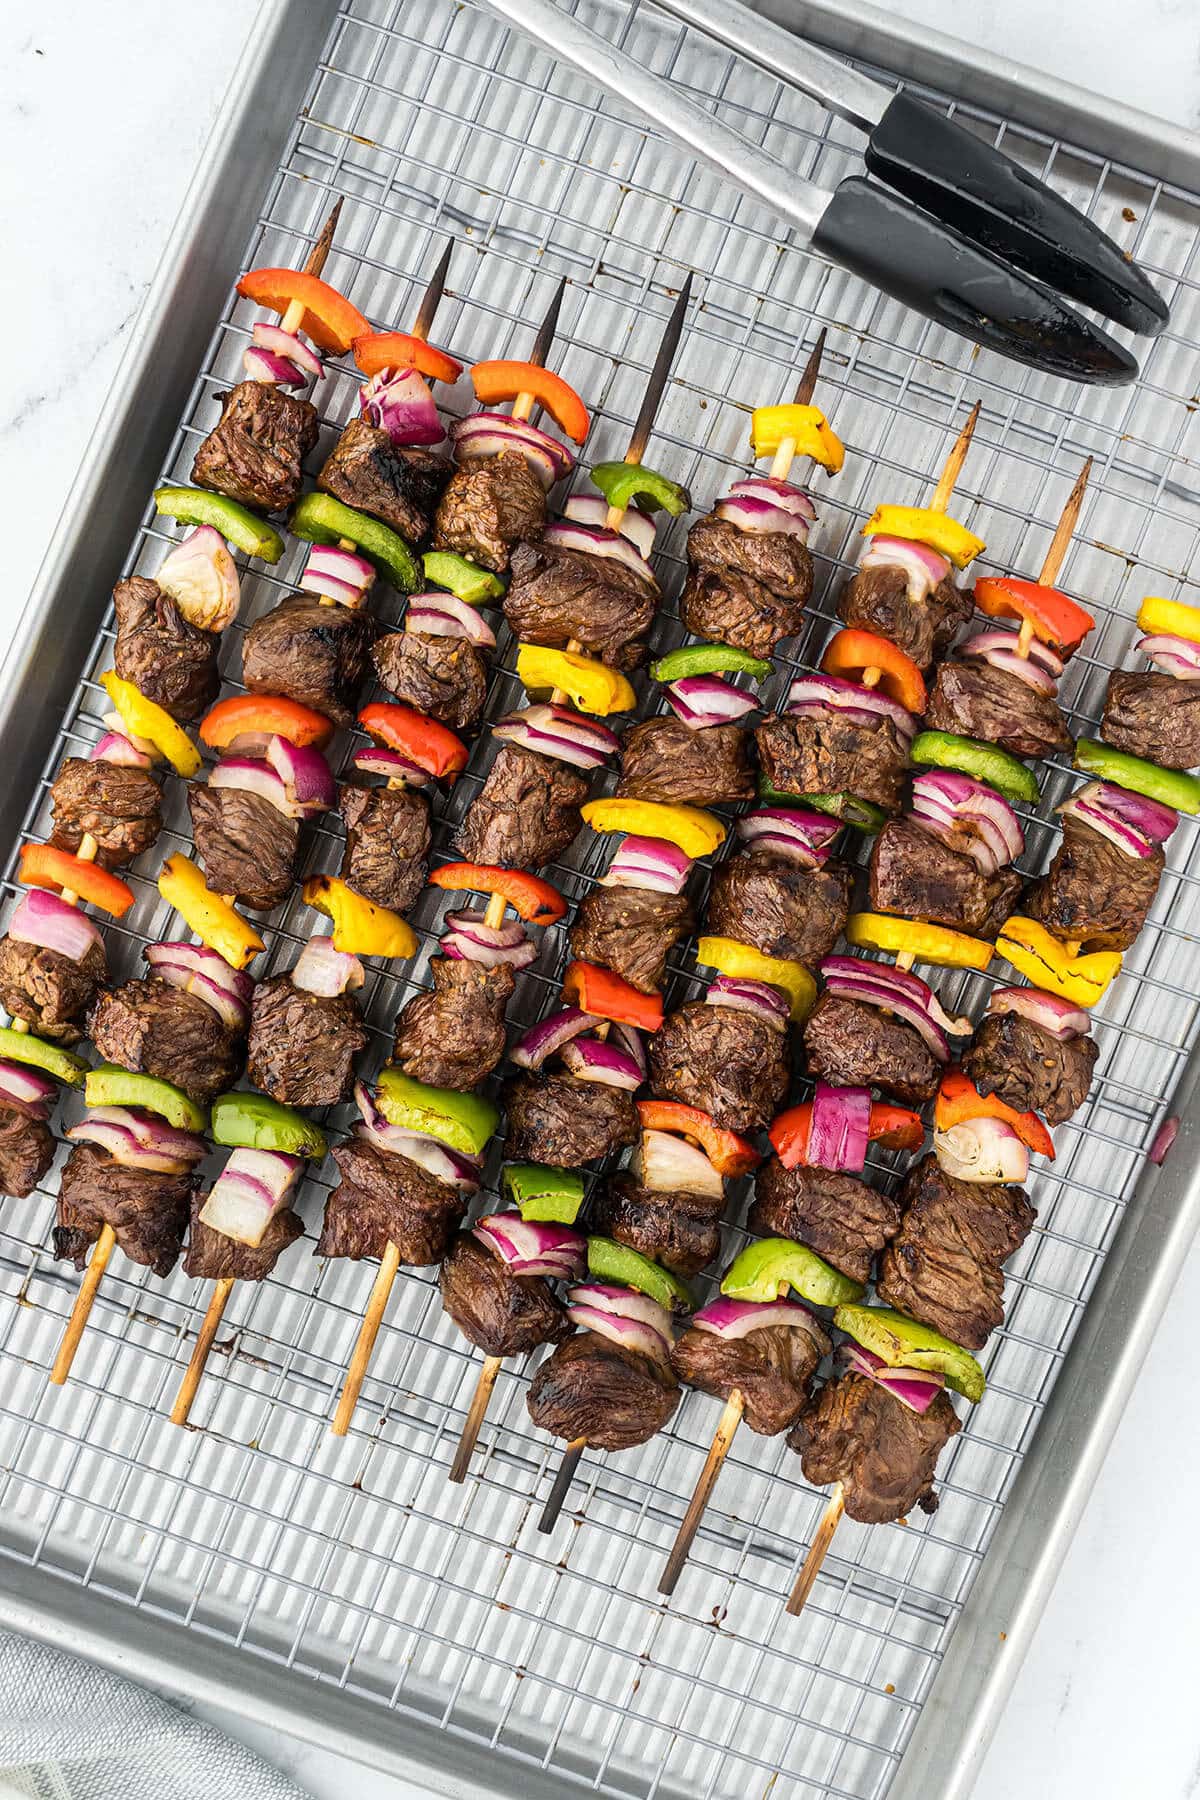 Grilled marinated steak shish kabobs on a platter.